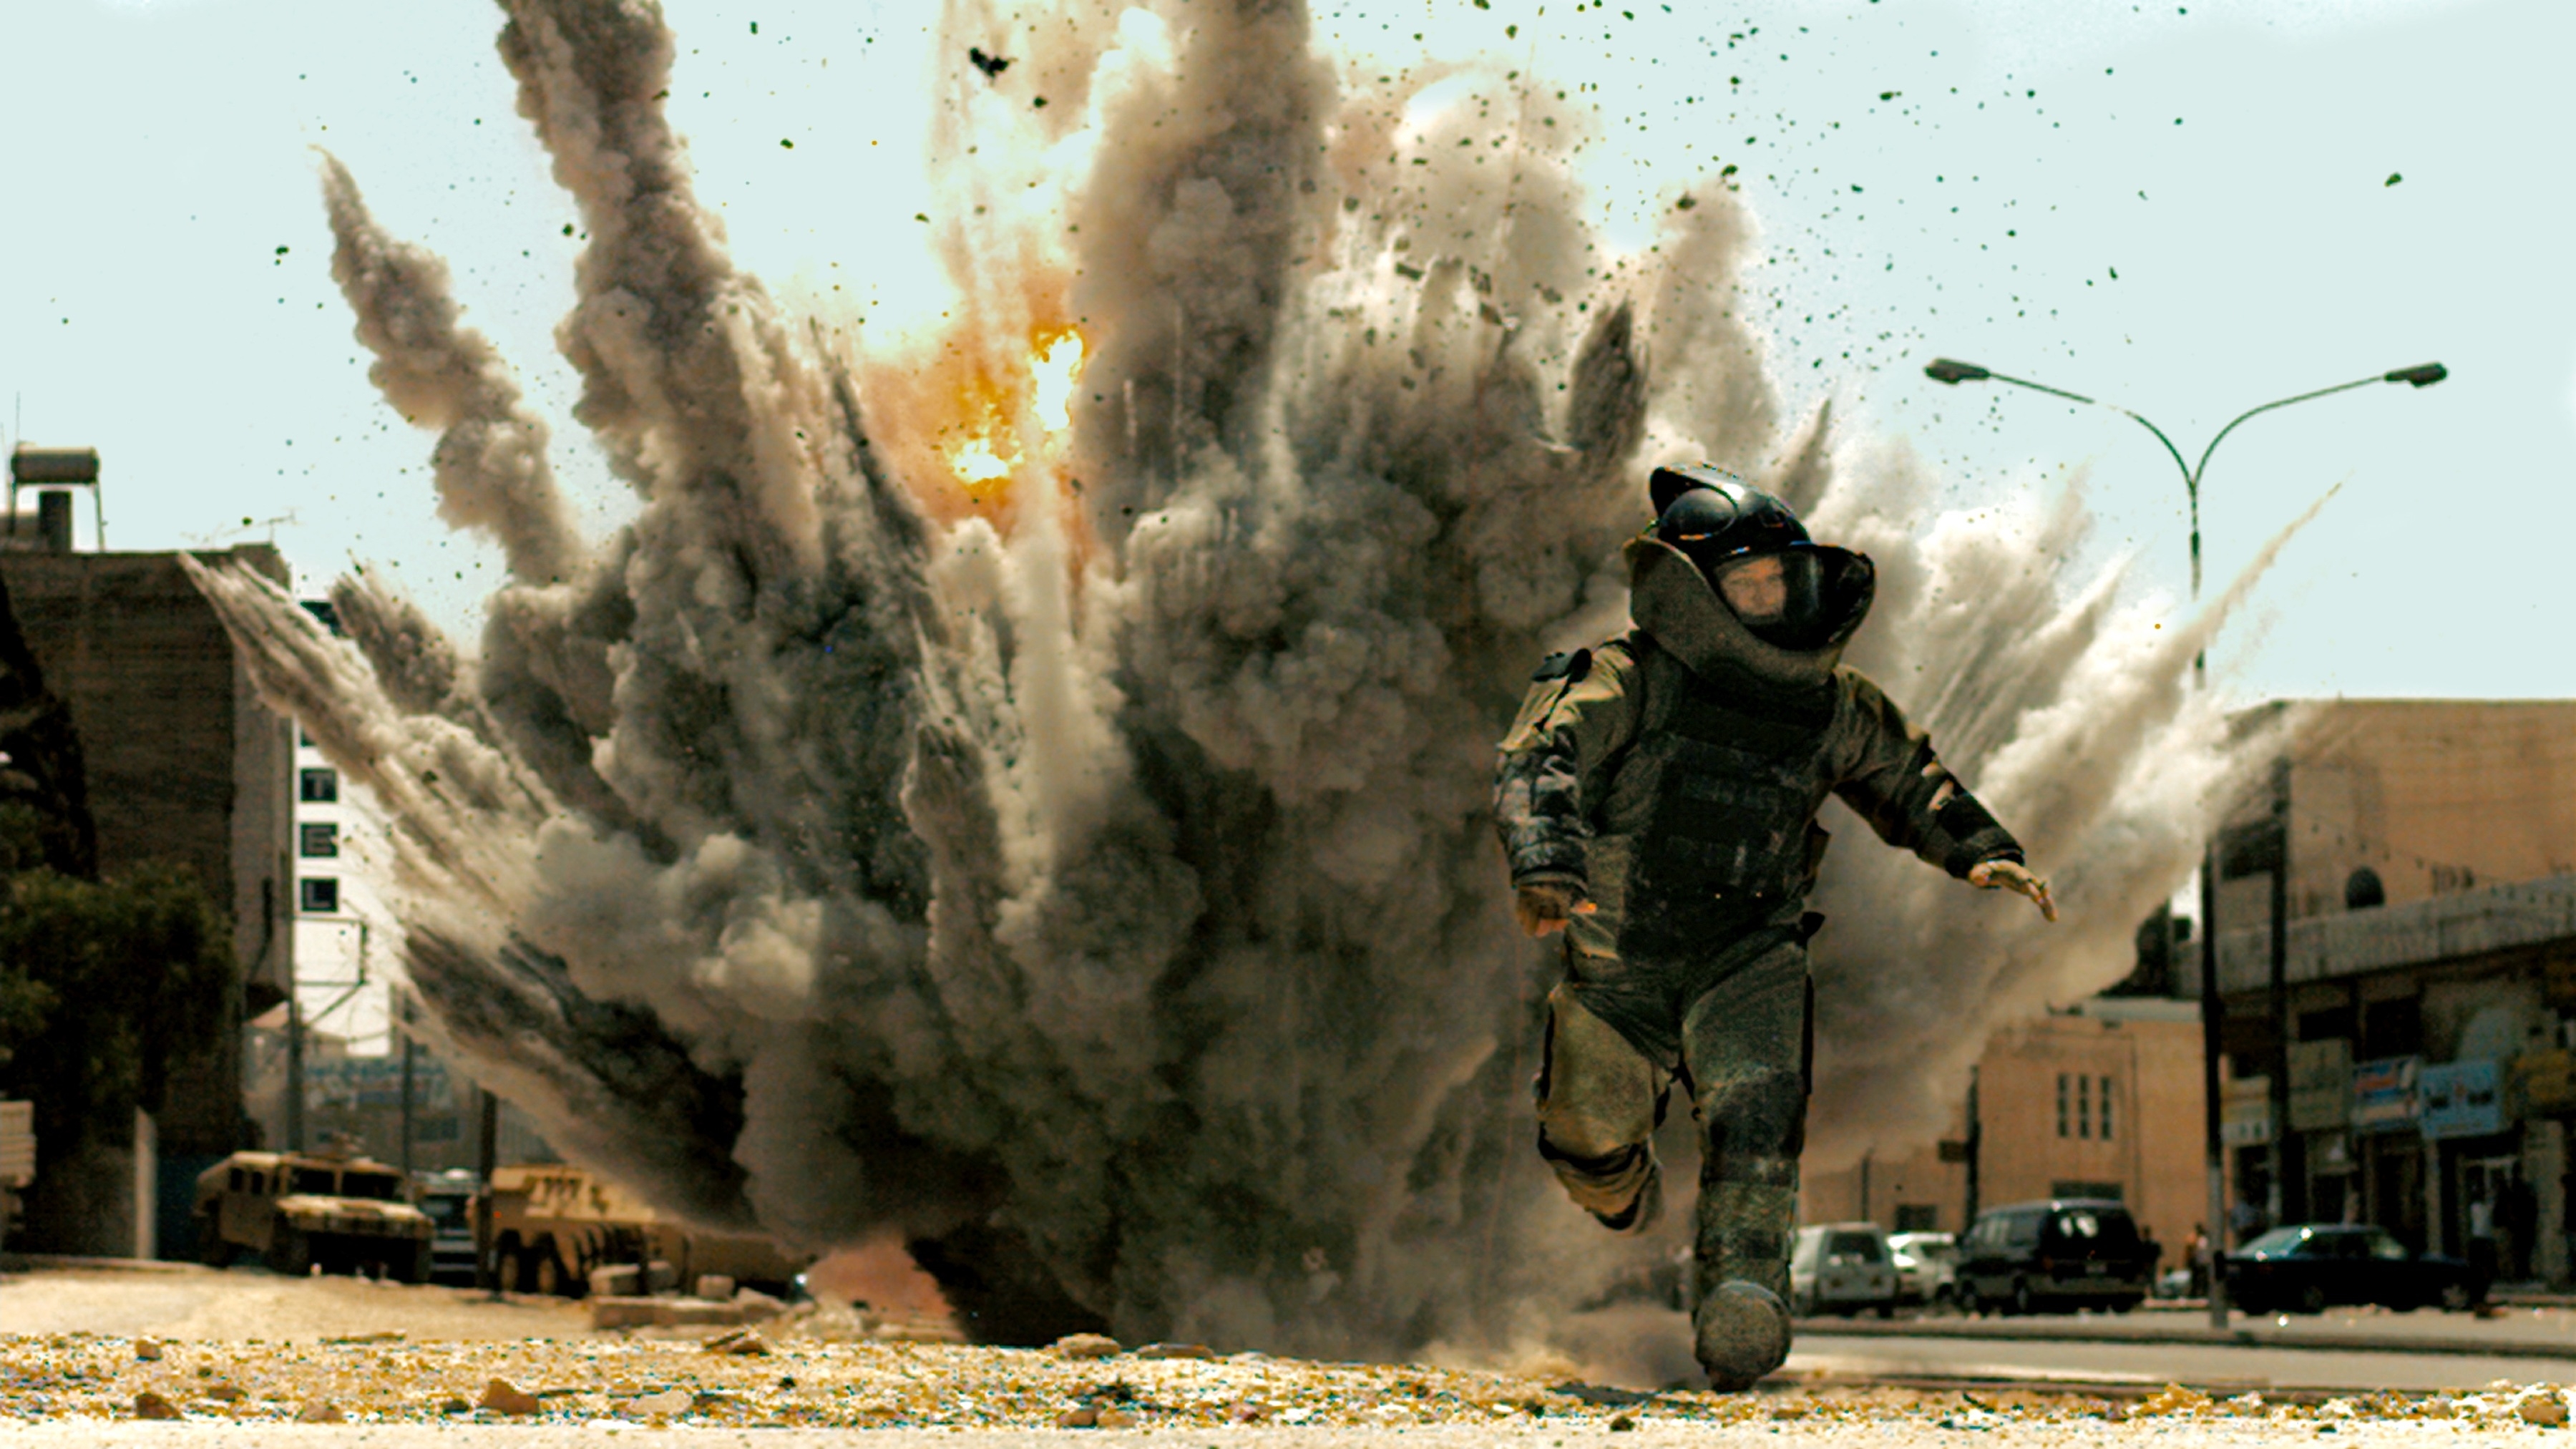 Voltage Pictures, producers of The Hurt Locker, just lost a lot of fans in Canada.